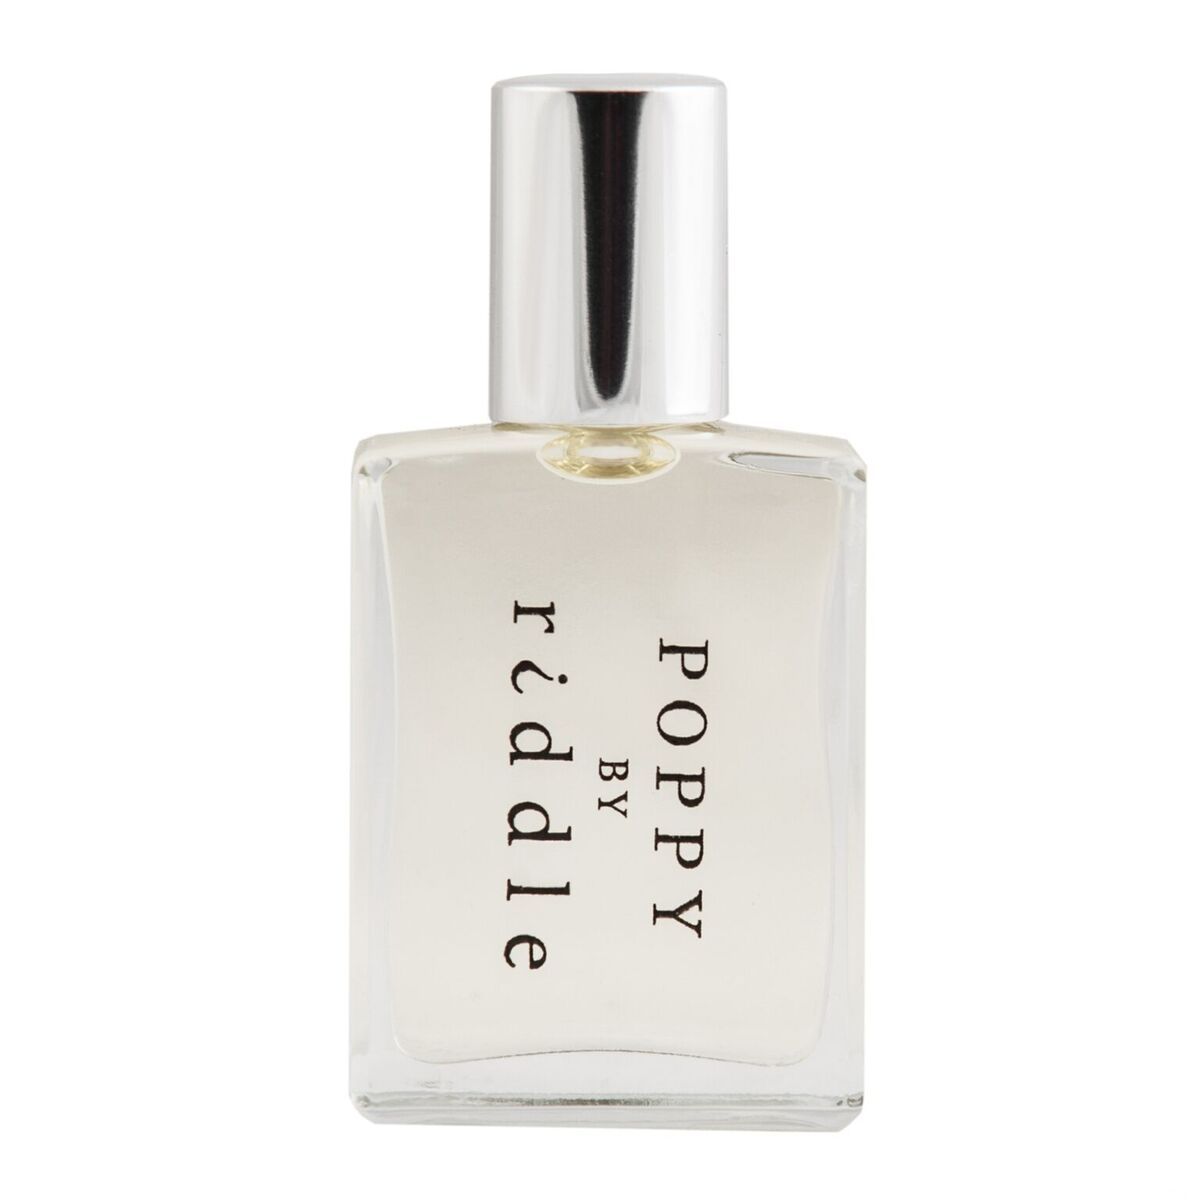 Roll-on scented oil - Poppy - 15 ml